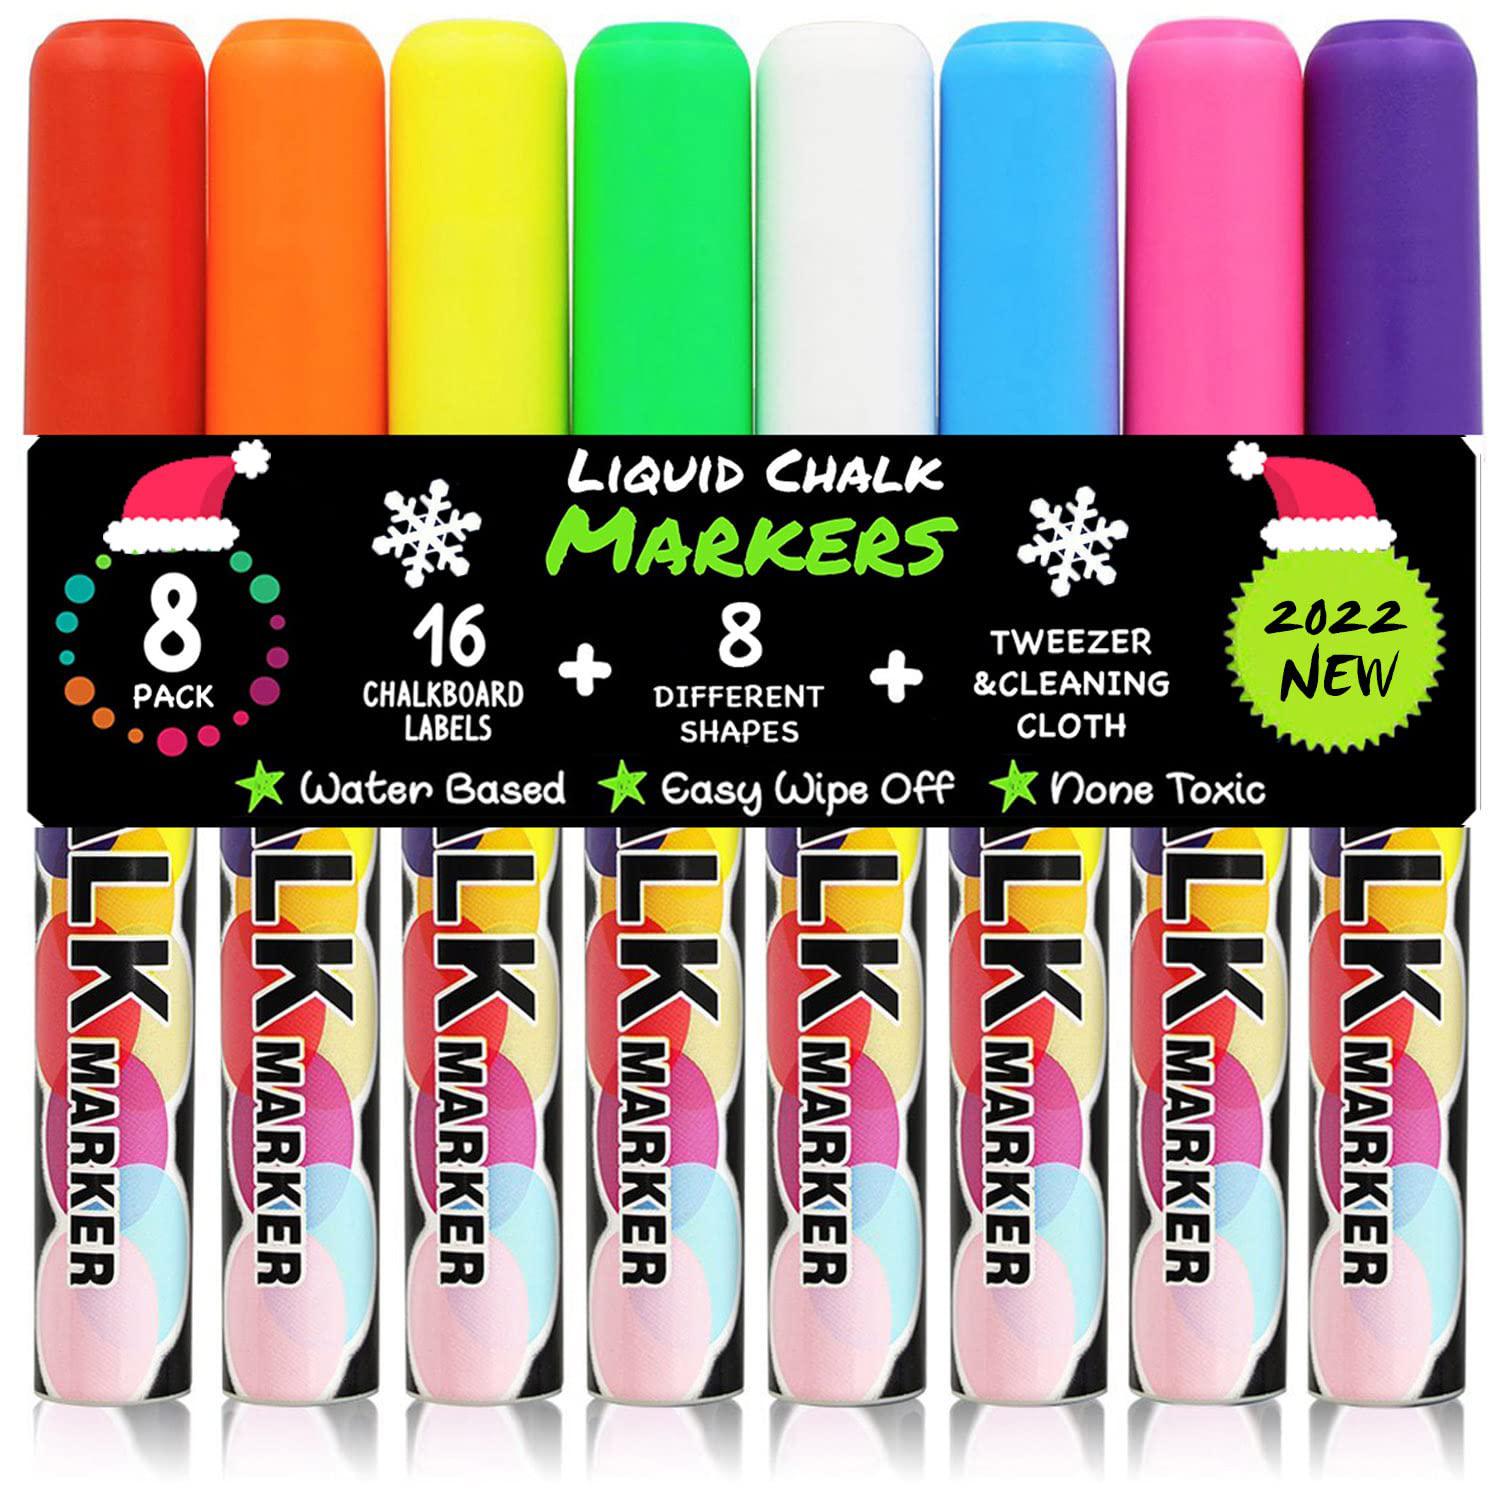 W Outwit Chalk Markers, Erasable Chalkboard Neon Pens for Kids Art, 8 Packs Non-Toxic Window Markers with Chisel or Fine Tip,16 Labels, Drawing Marker